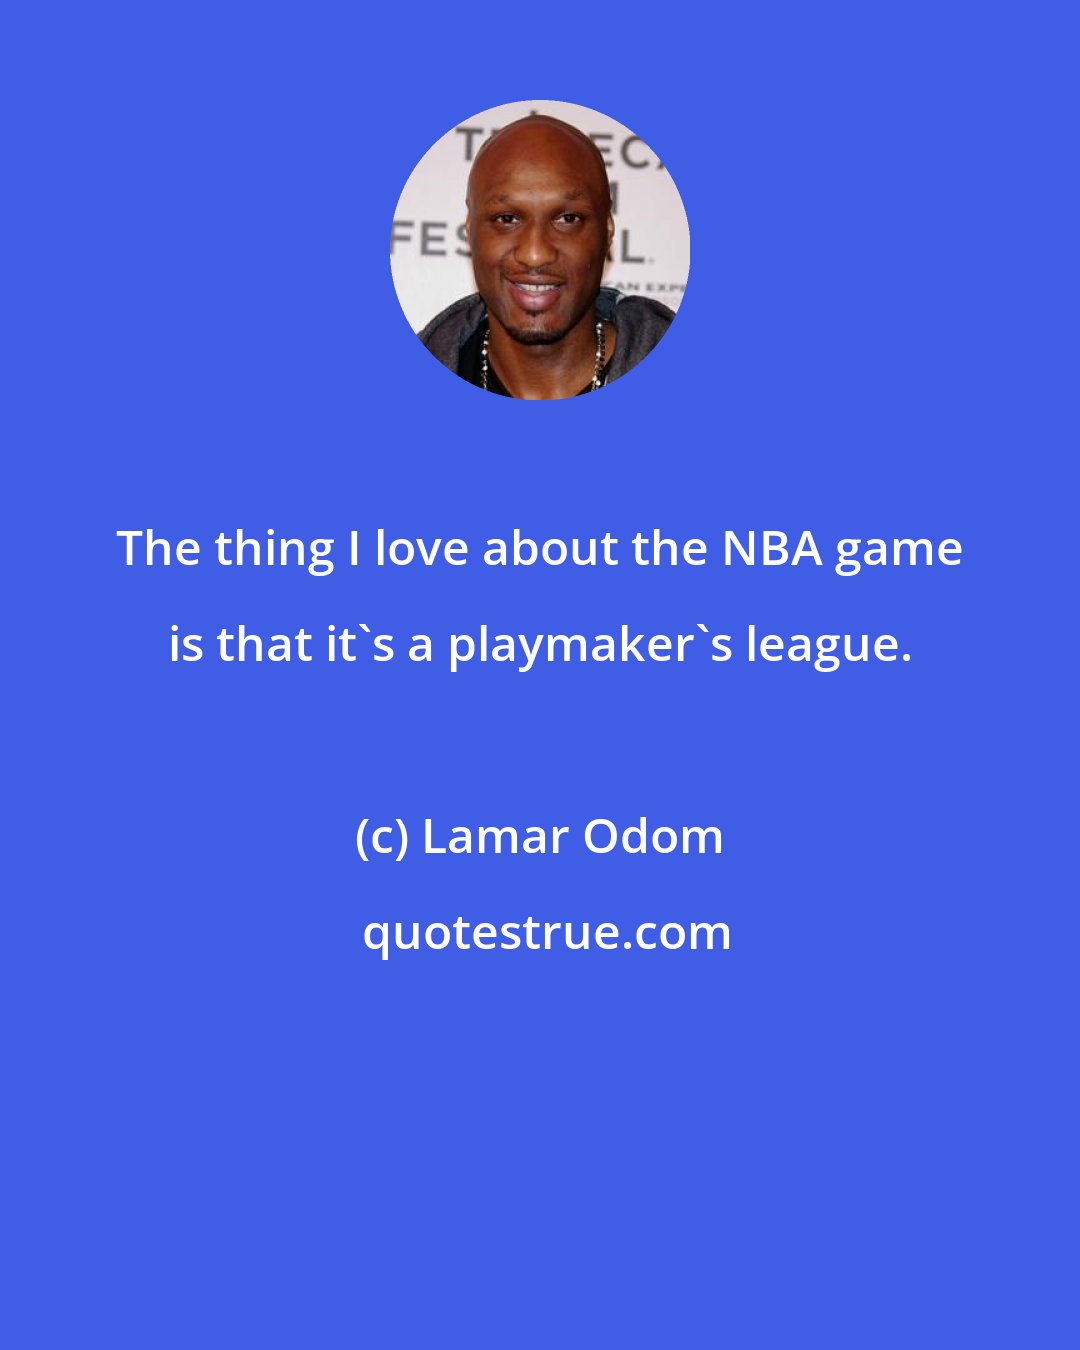 Lamar Odom: The thing I love about the NBA game is that it's a playmaker's league.